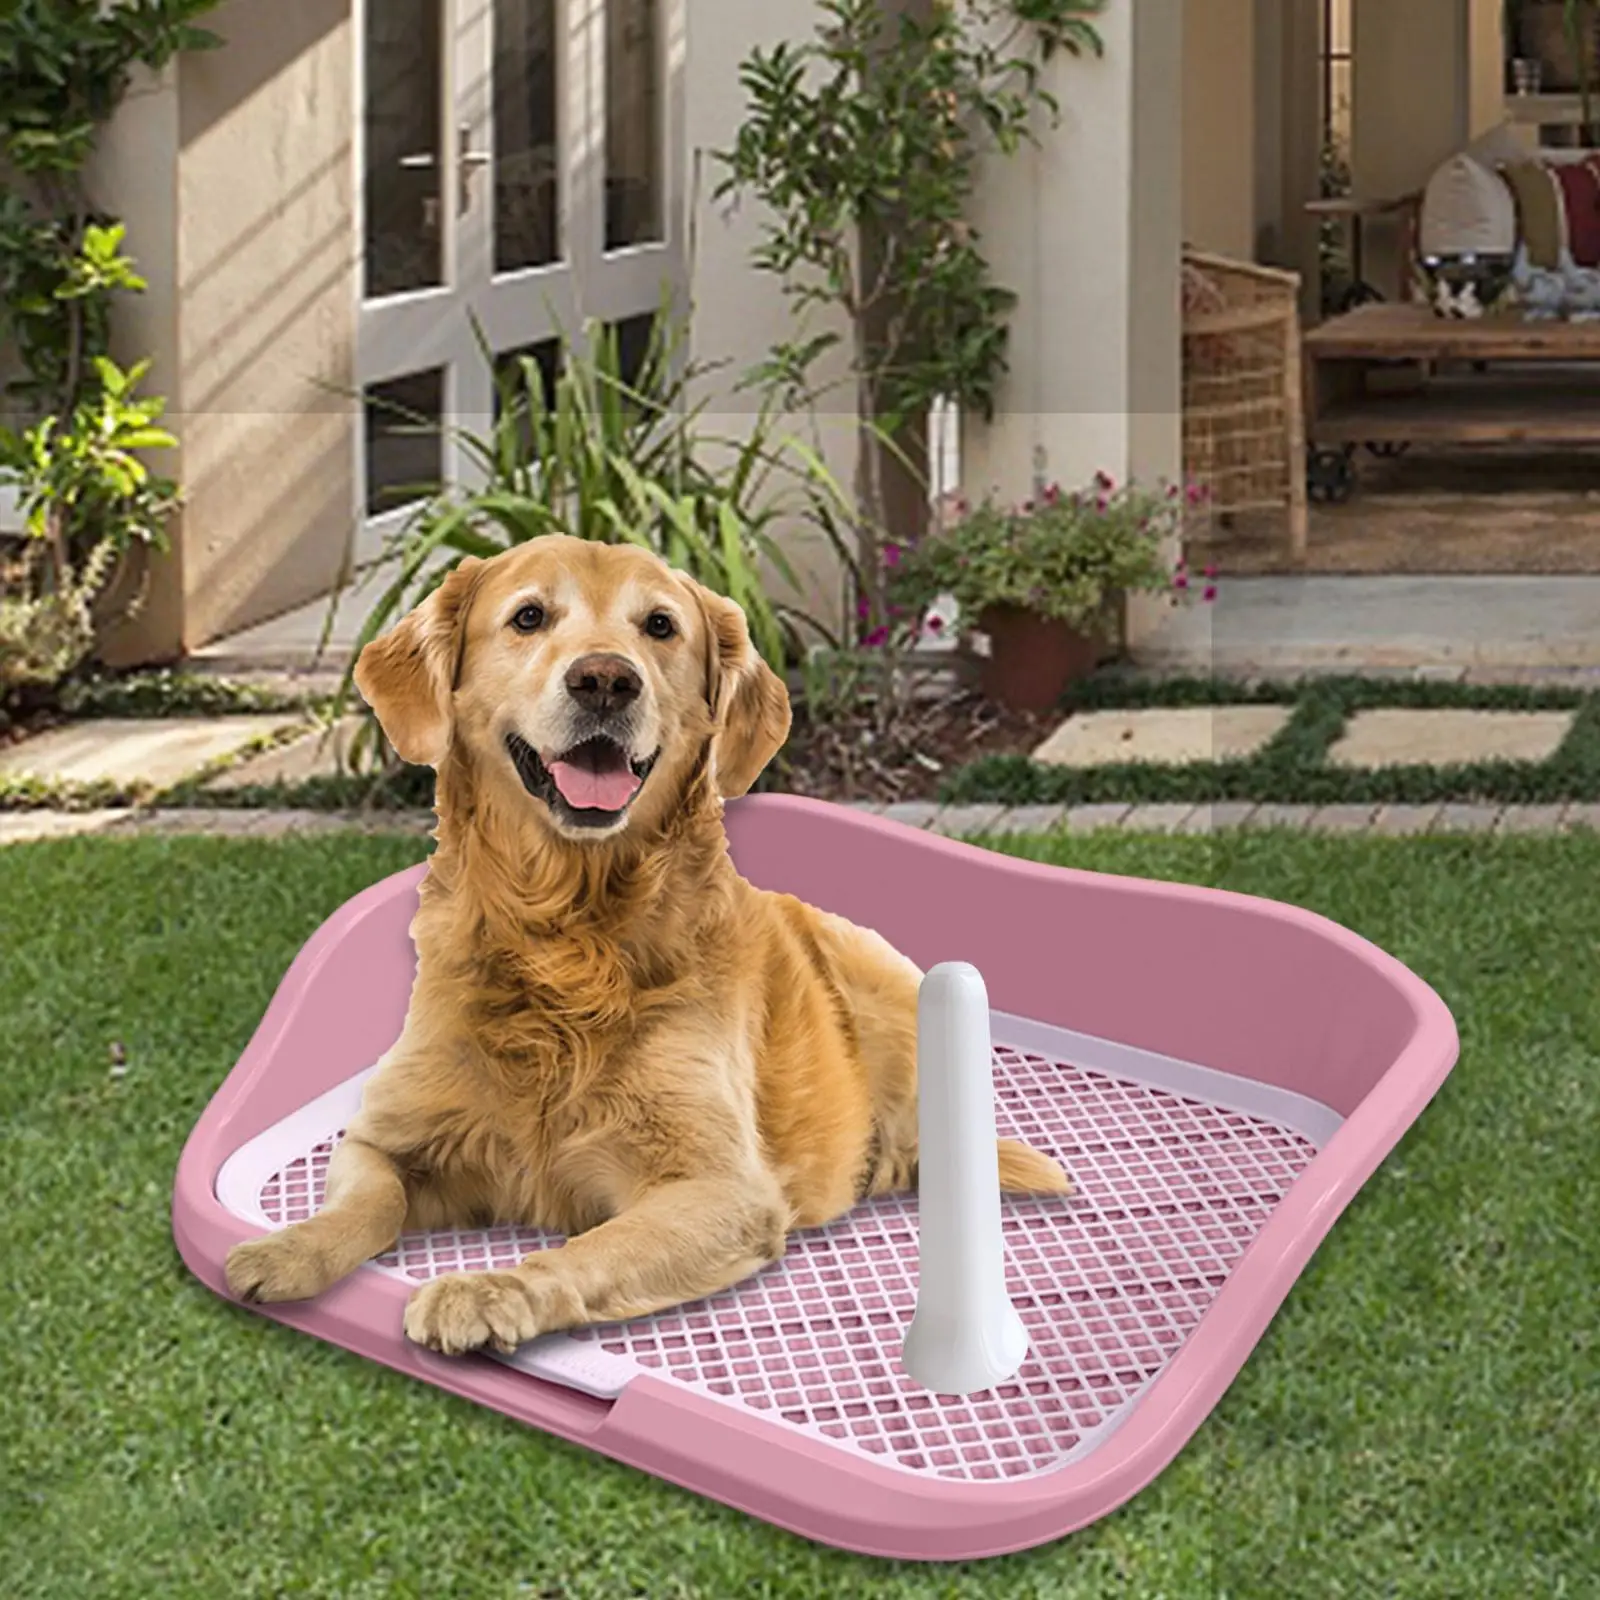 Durable Mesh Dog Toilet Litter Box Keep Floors Clean with Fence with Protection Wall for Pee Training Ferret Indoor Medium Dogs